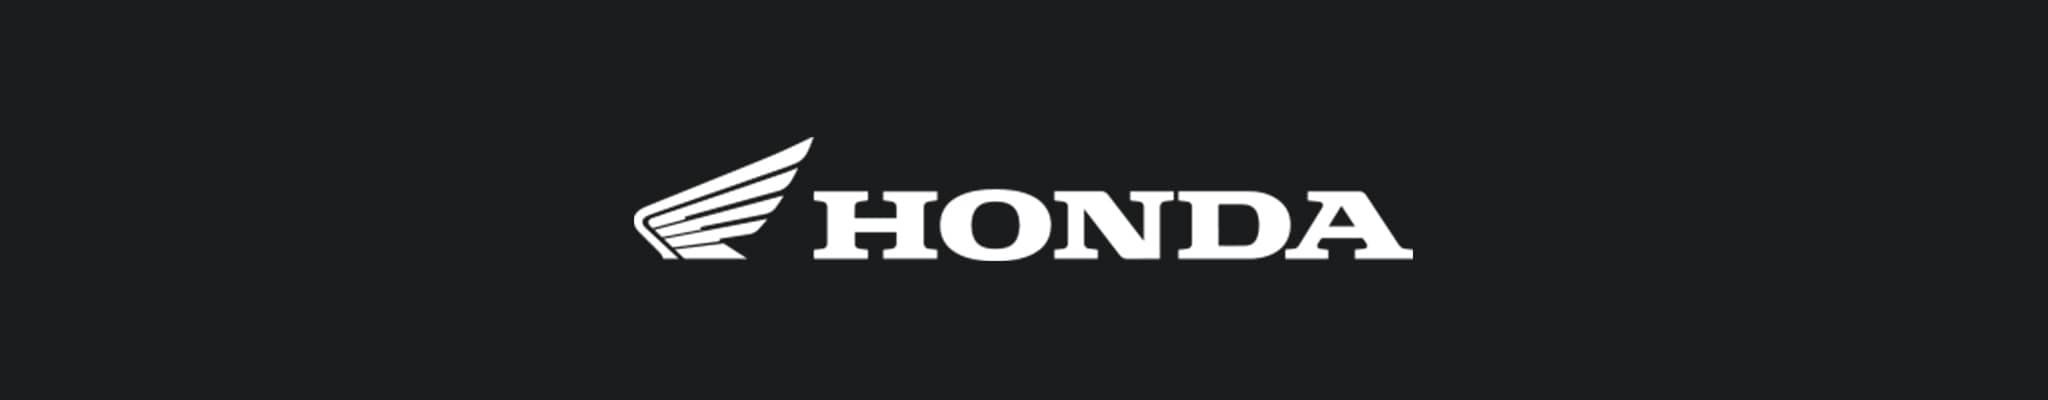 The Honda logo in white on a black background, featured alongside the text on the Perfex website.